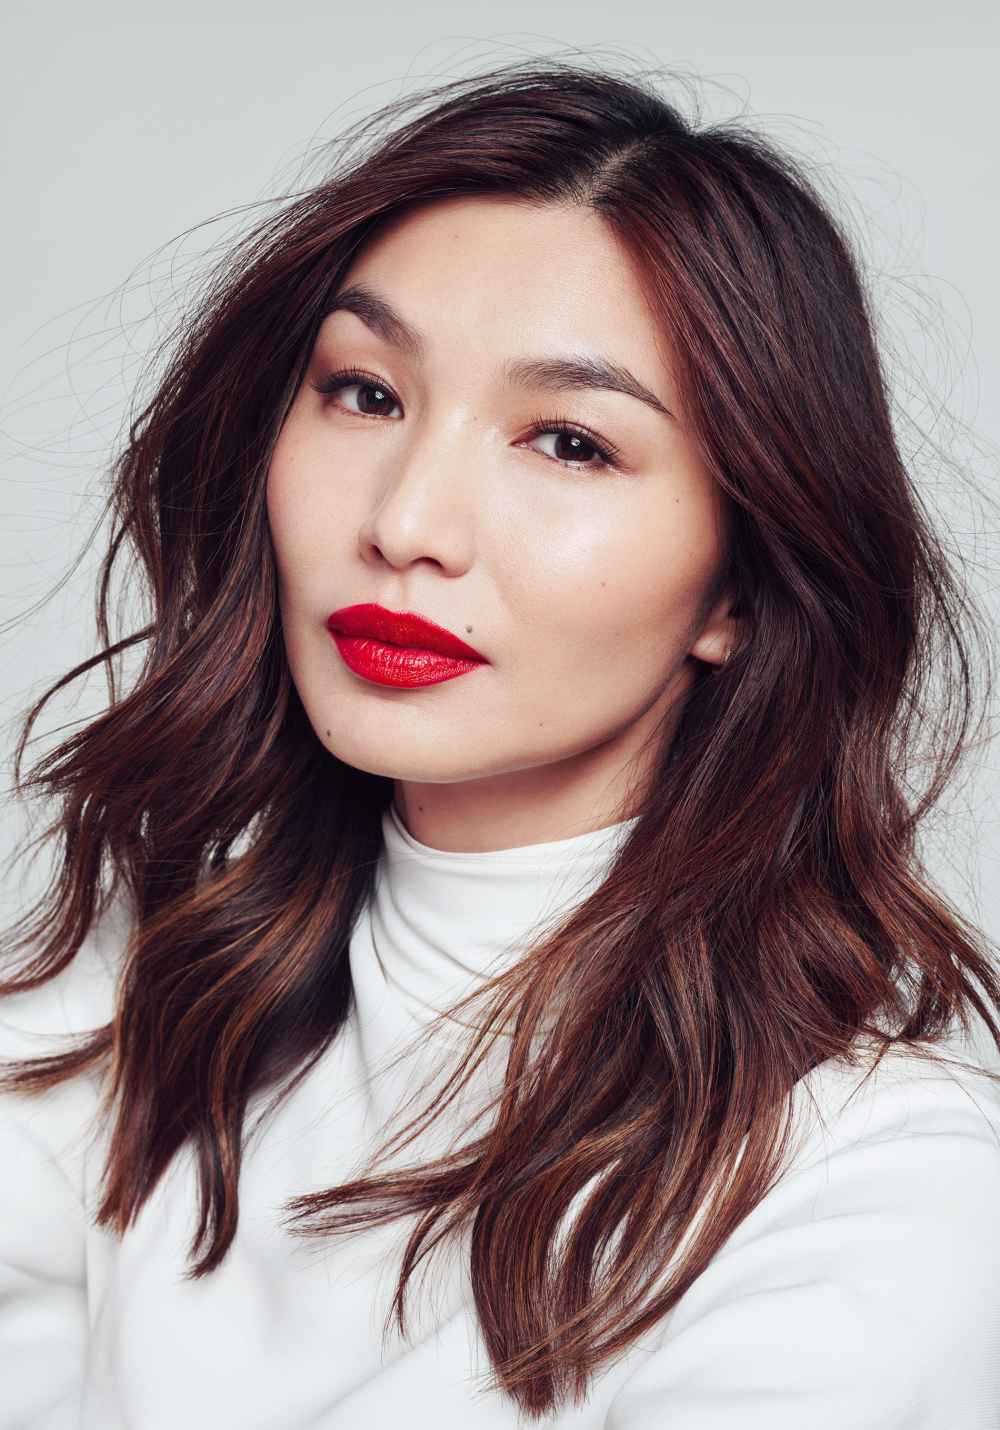 Gemma Chan Becomes the Face of a Major Beauty Brand